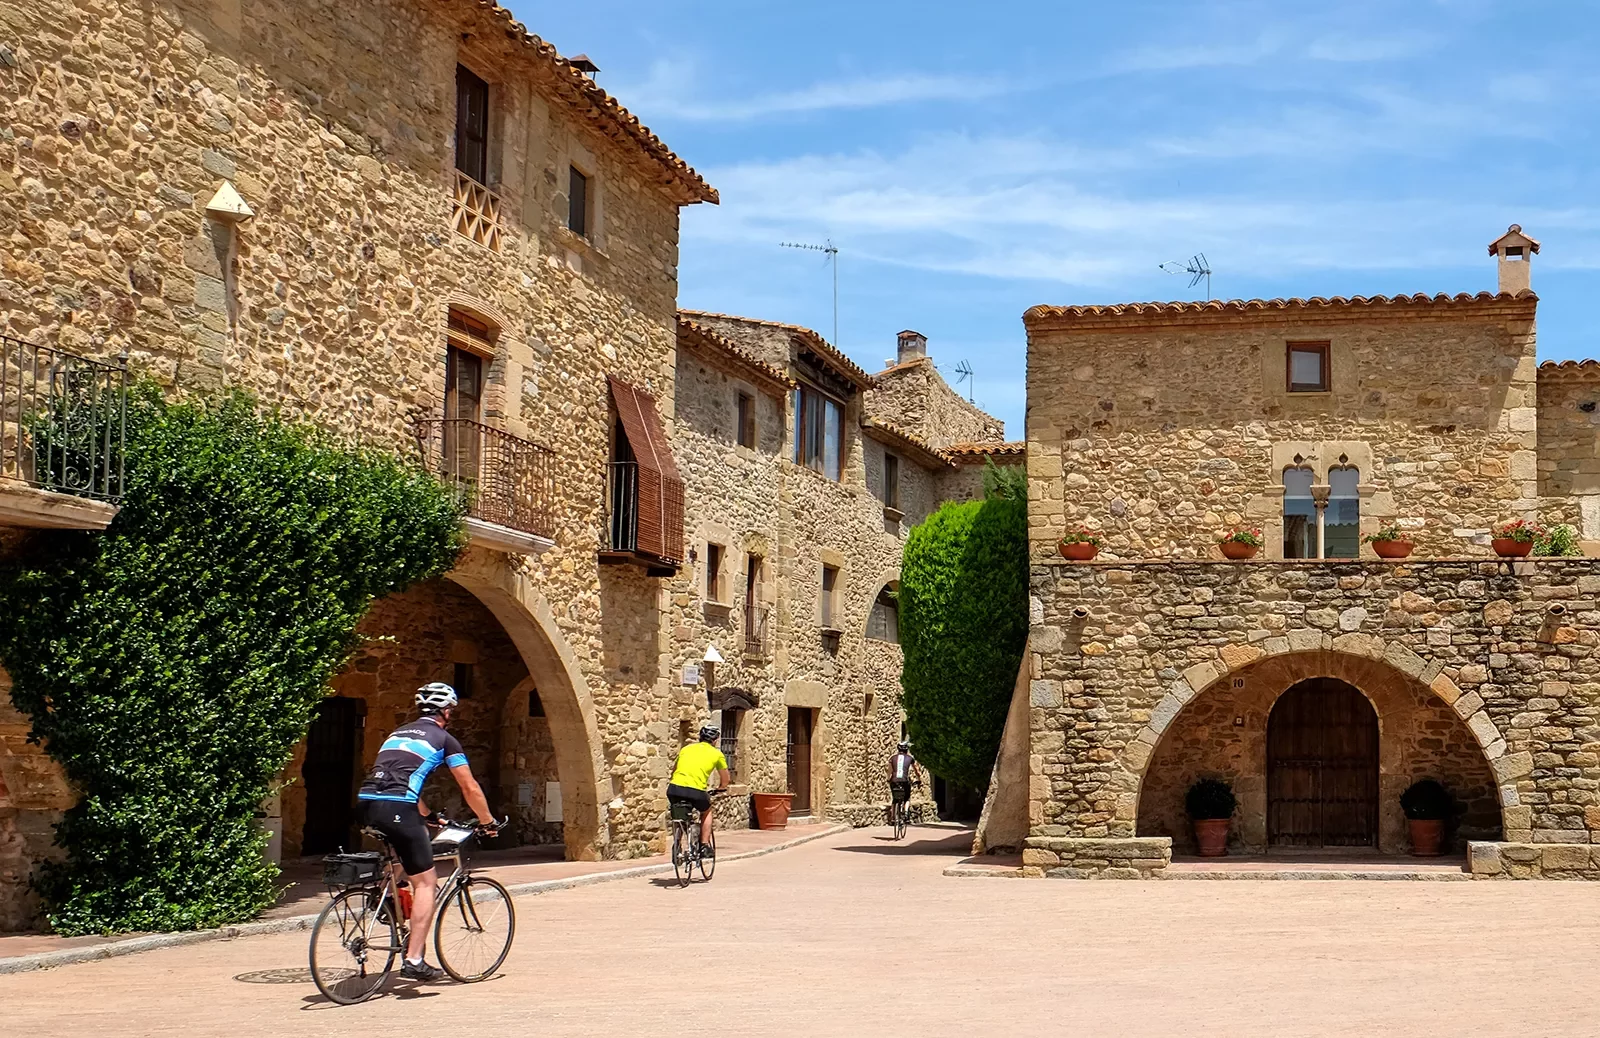 Two guests cycling through village, tan stone buildings all around.